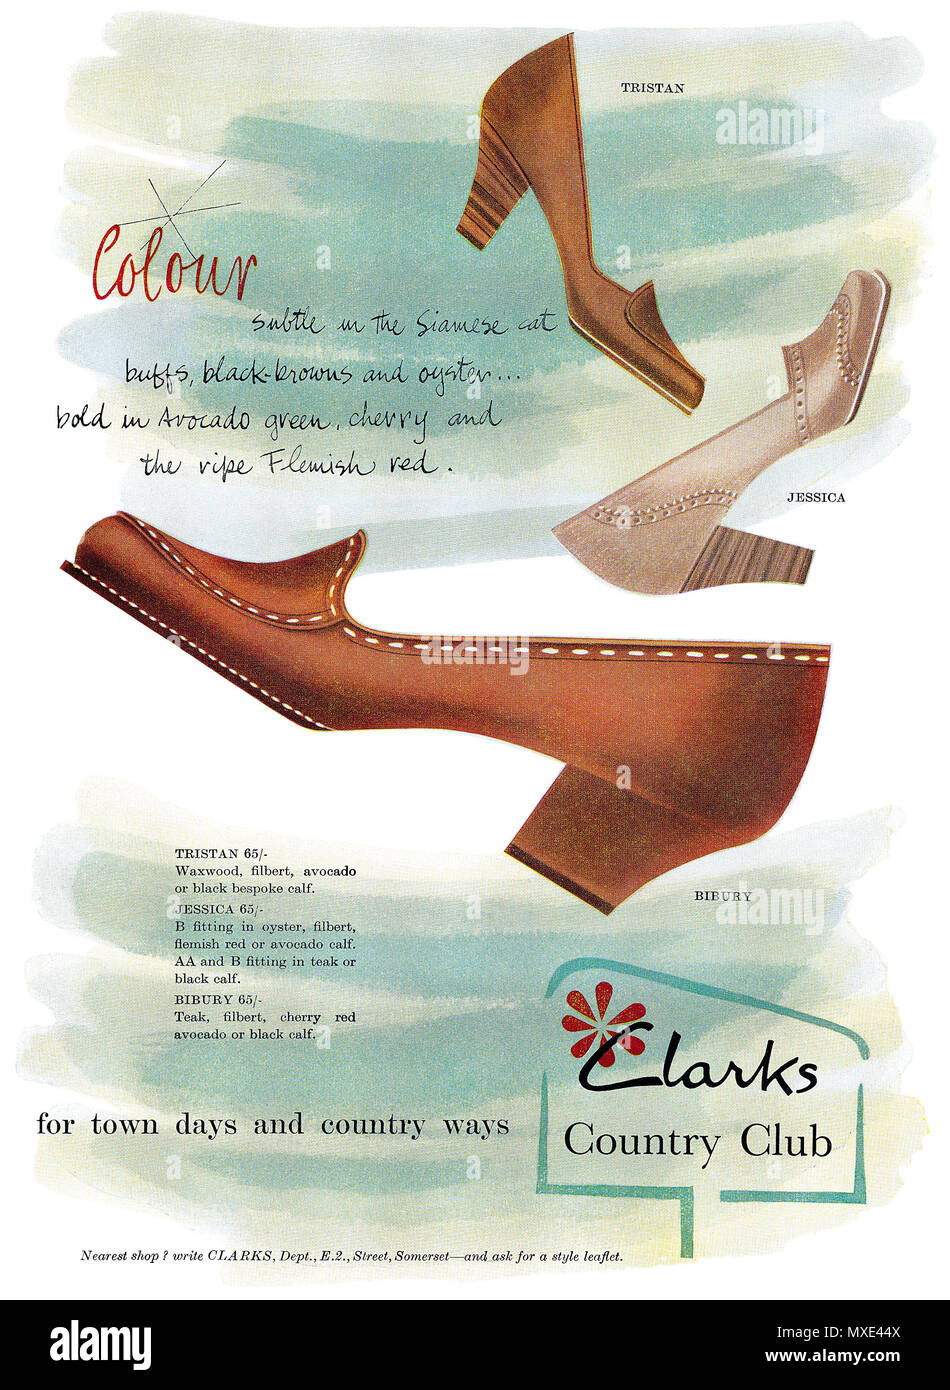 clarks shoes price in uk